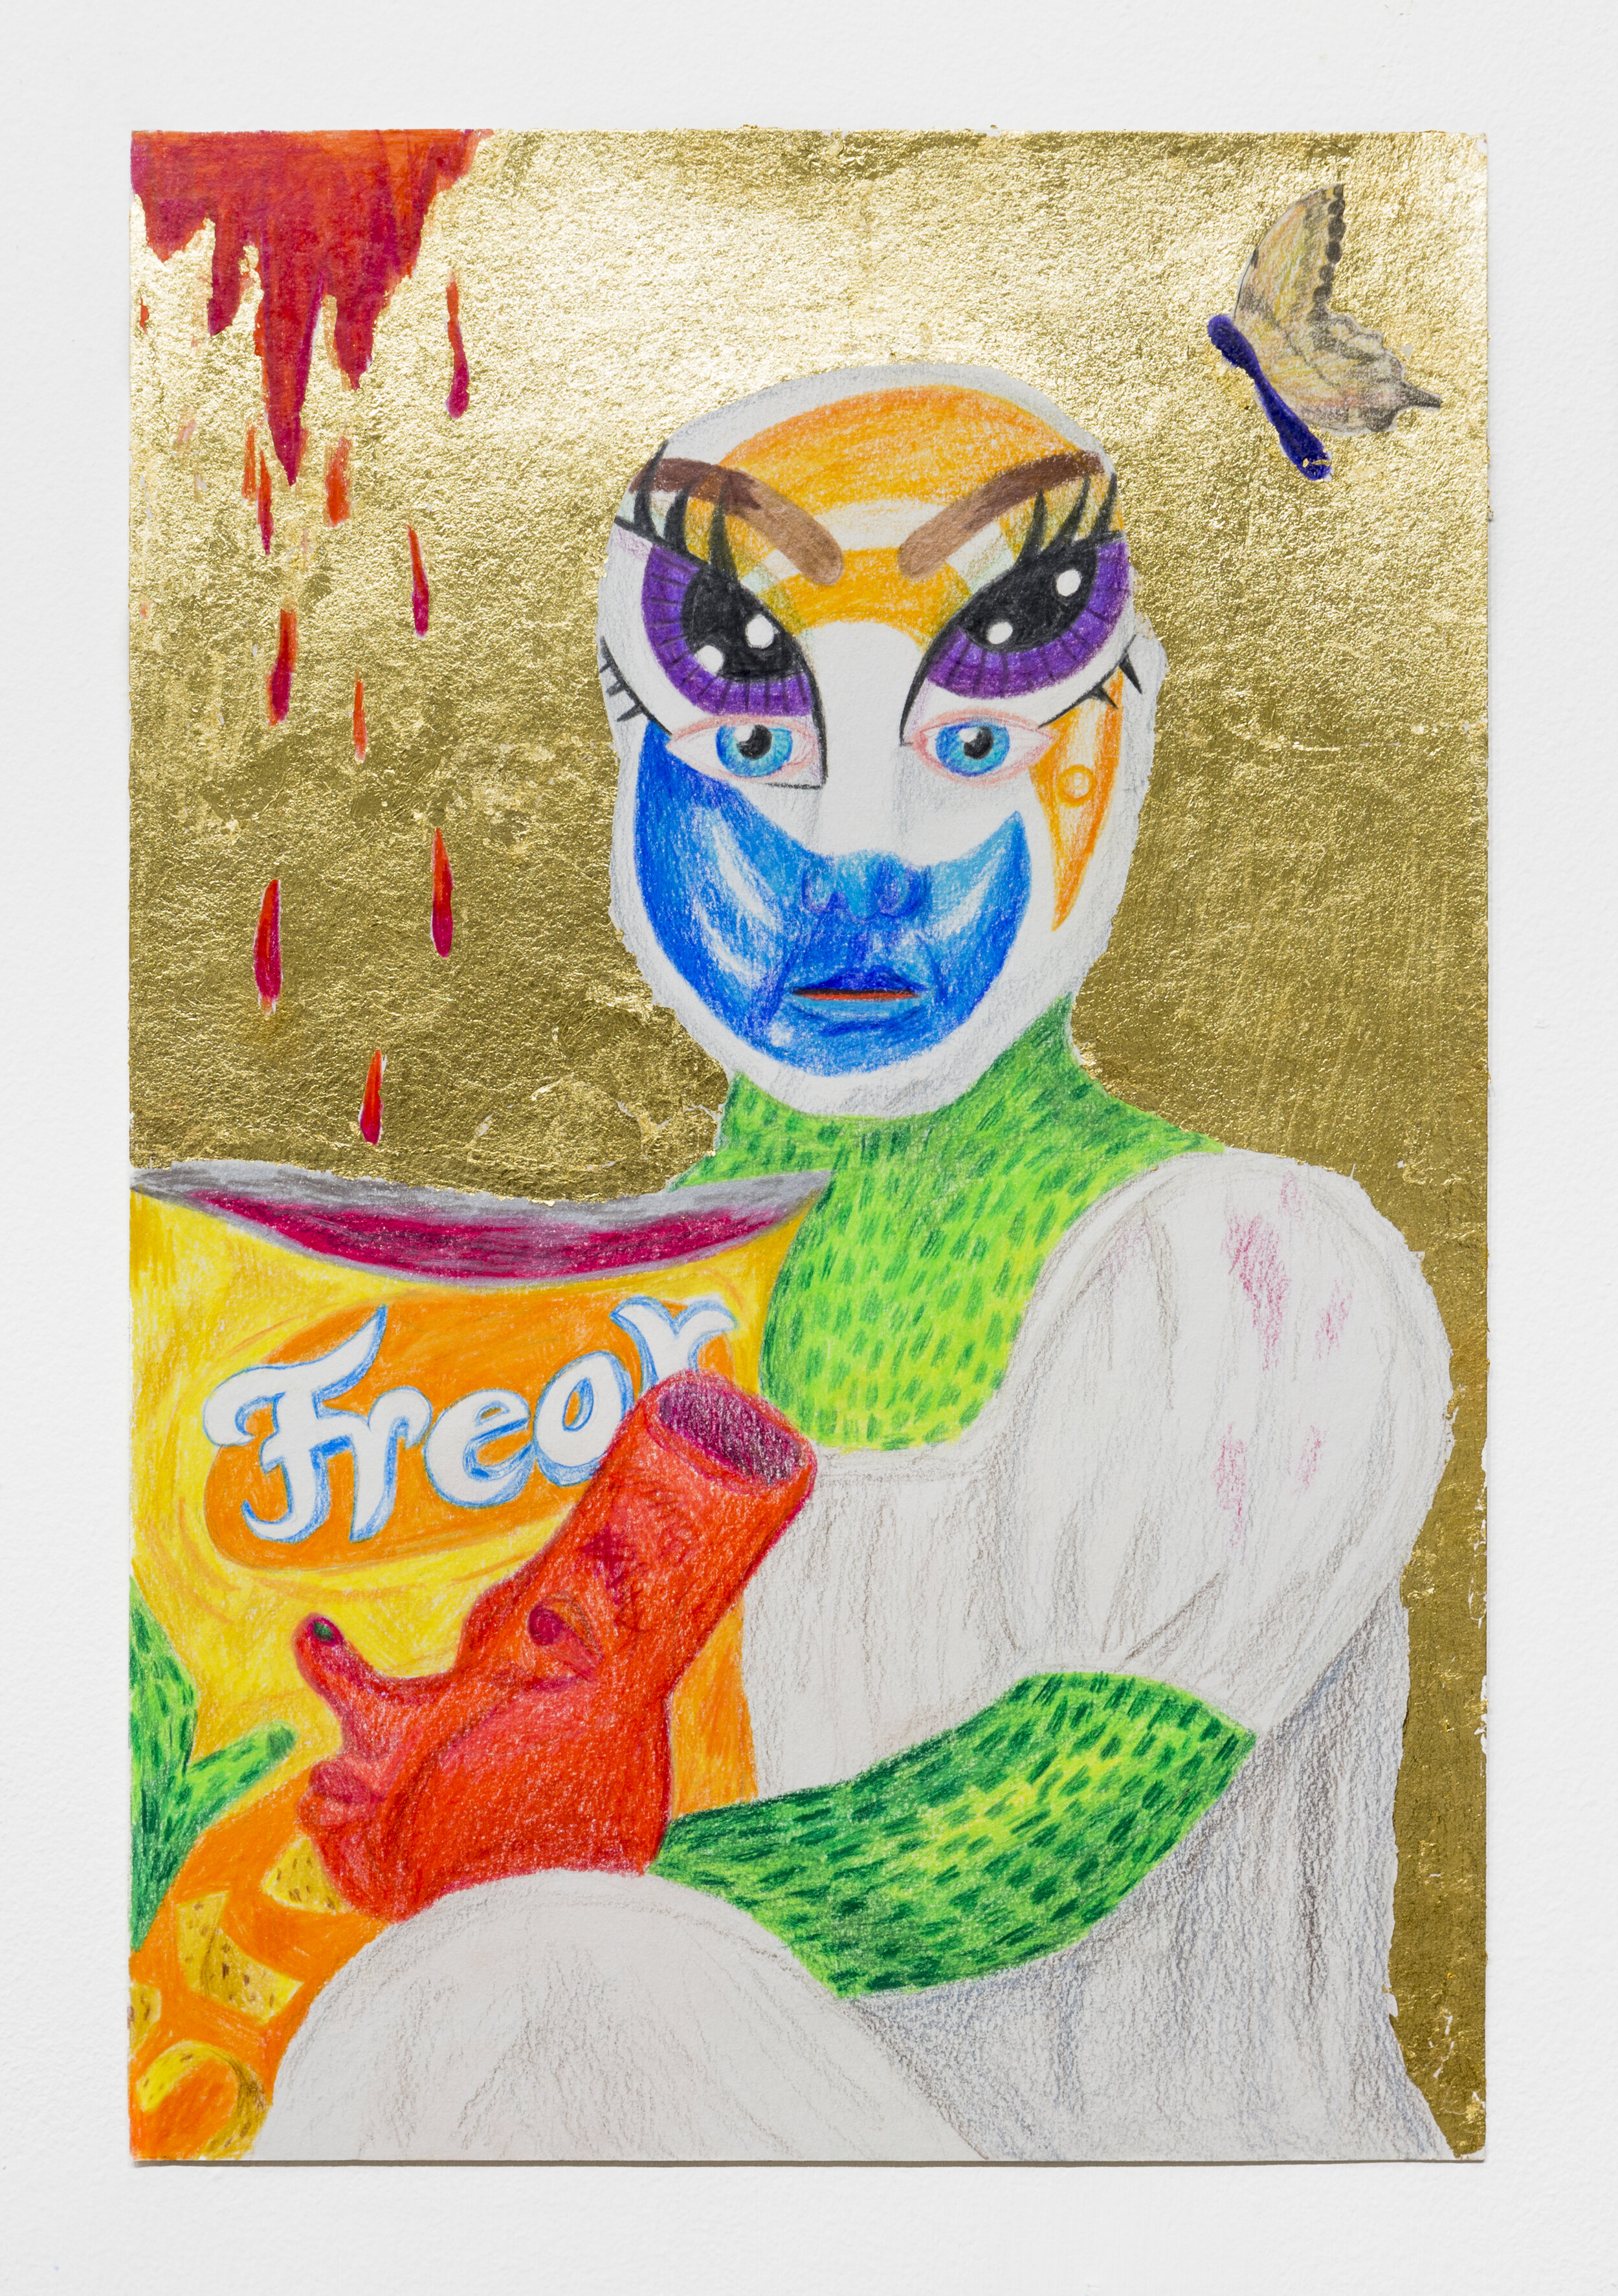   Tidepodphagia #1 (Baby with Bratz Eyes and Nixon Bong),  2018  18 x 12 inches (45.72 x 30.48 cm.)  Colored pencil and gold leaf on paper 